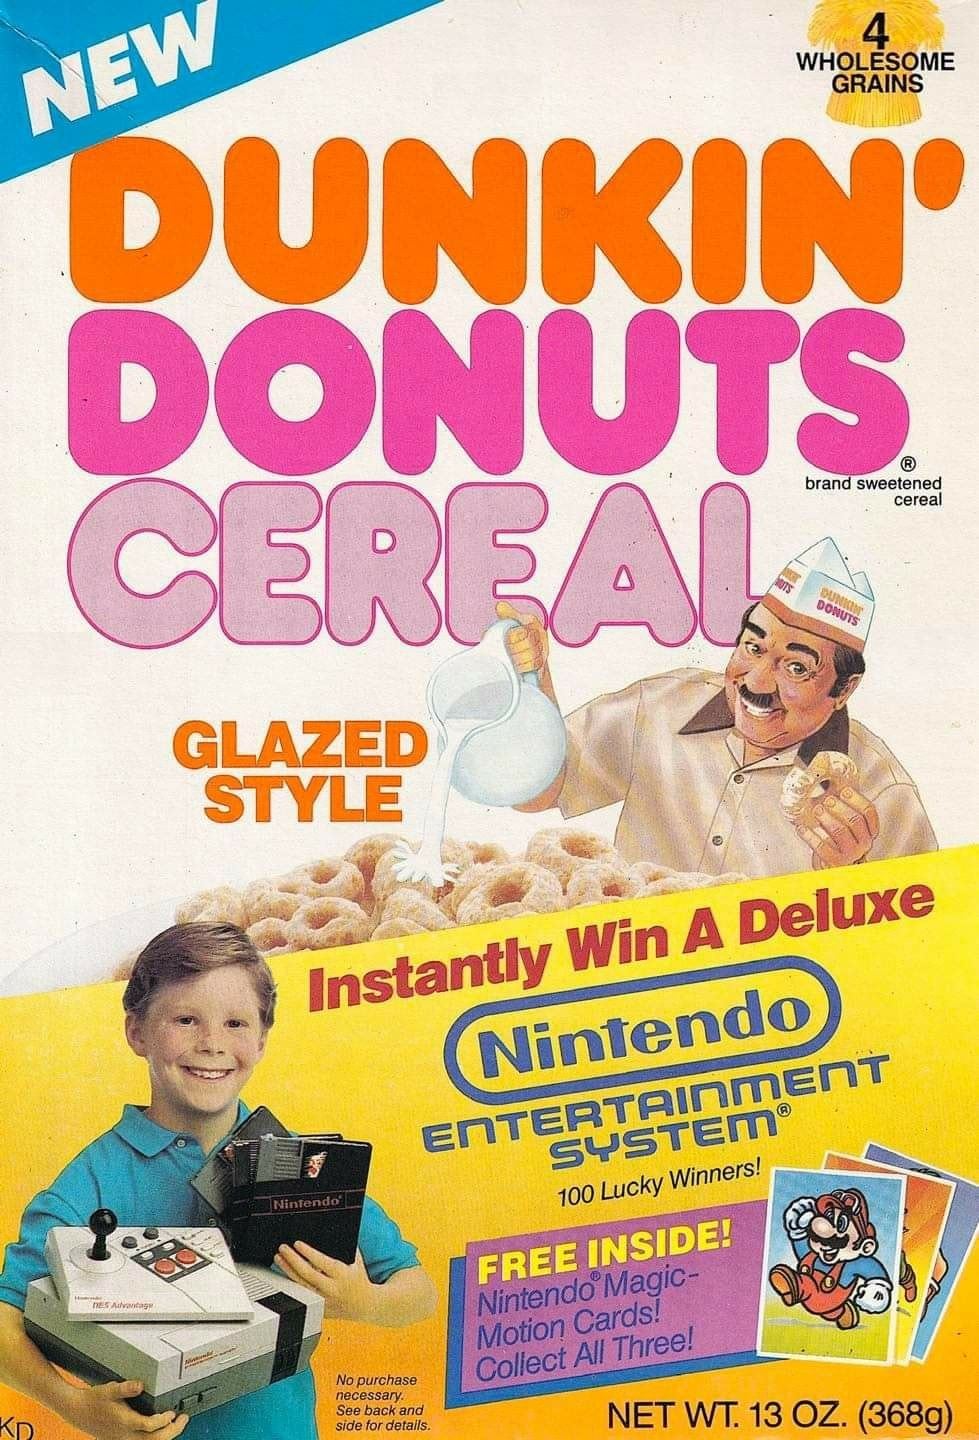 dunkin donuts - 4 Wholesome Grains New Dunkin Donuts Cereal brand sweetened cereal Muts Duma Donuts Glazed Style Instantly Win A Deluxe Nintendo Entertainment System Nintendo 100 Lucky Winners! Advantage Free Inside! Nintendo Magic Motion Cards! Collect A